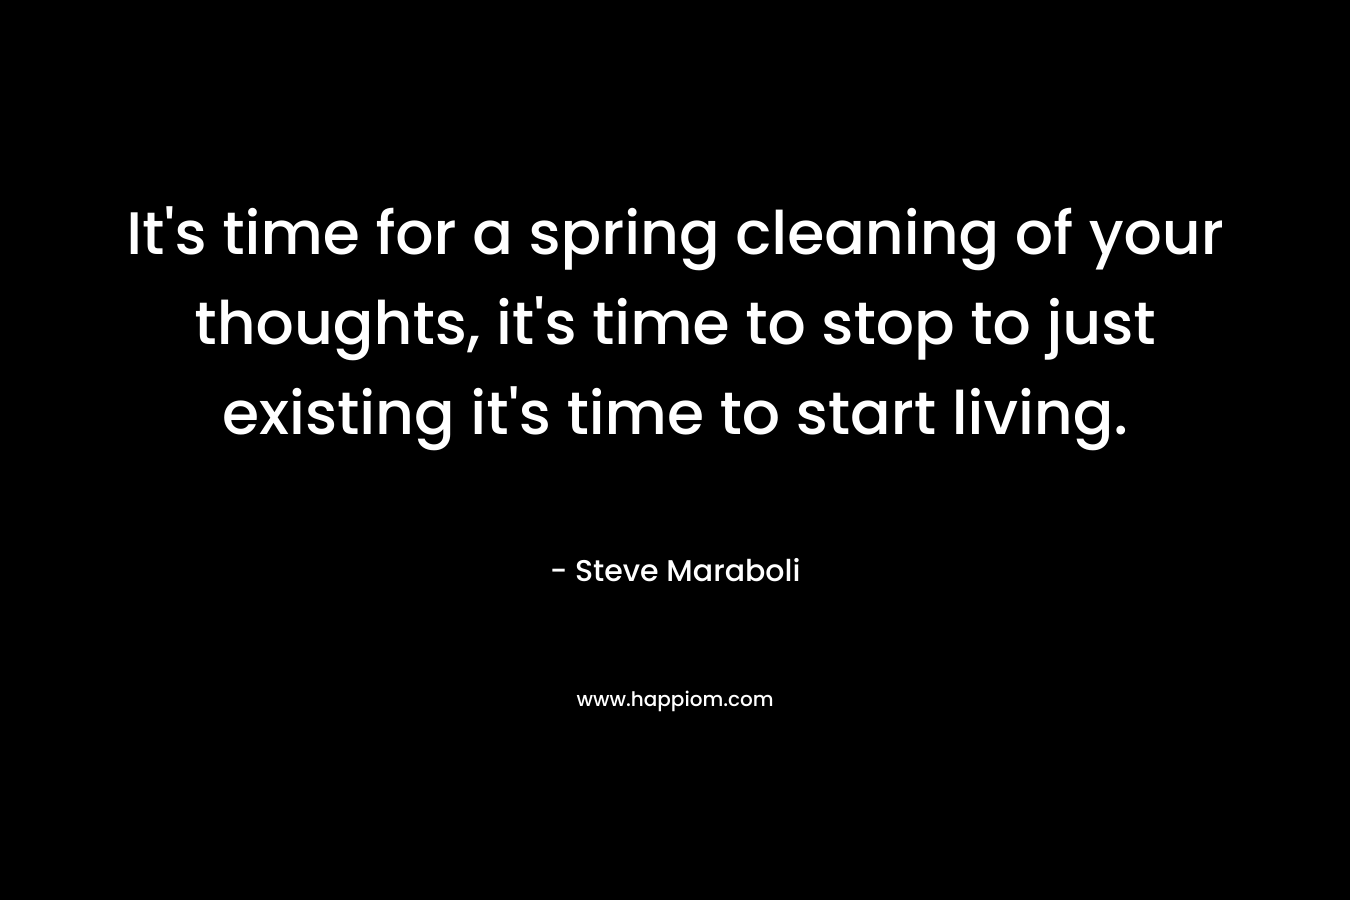 It's time for a spring cleaning of your thoughts, it's time to stop to just existing it's time to start living.